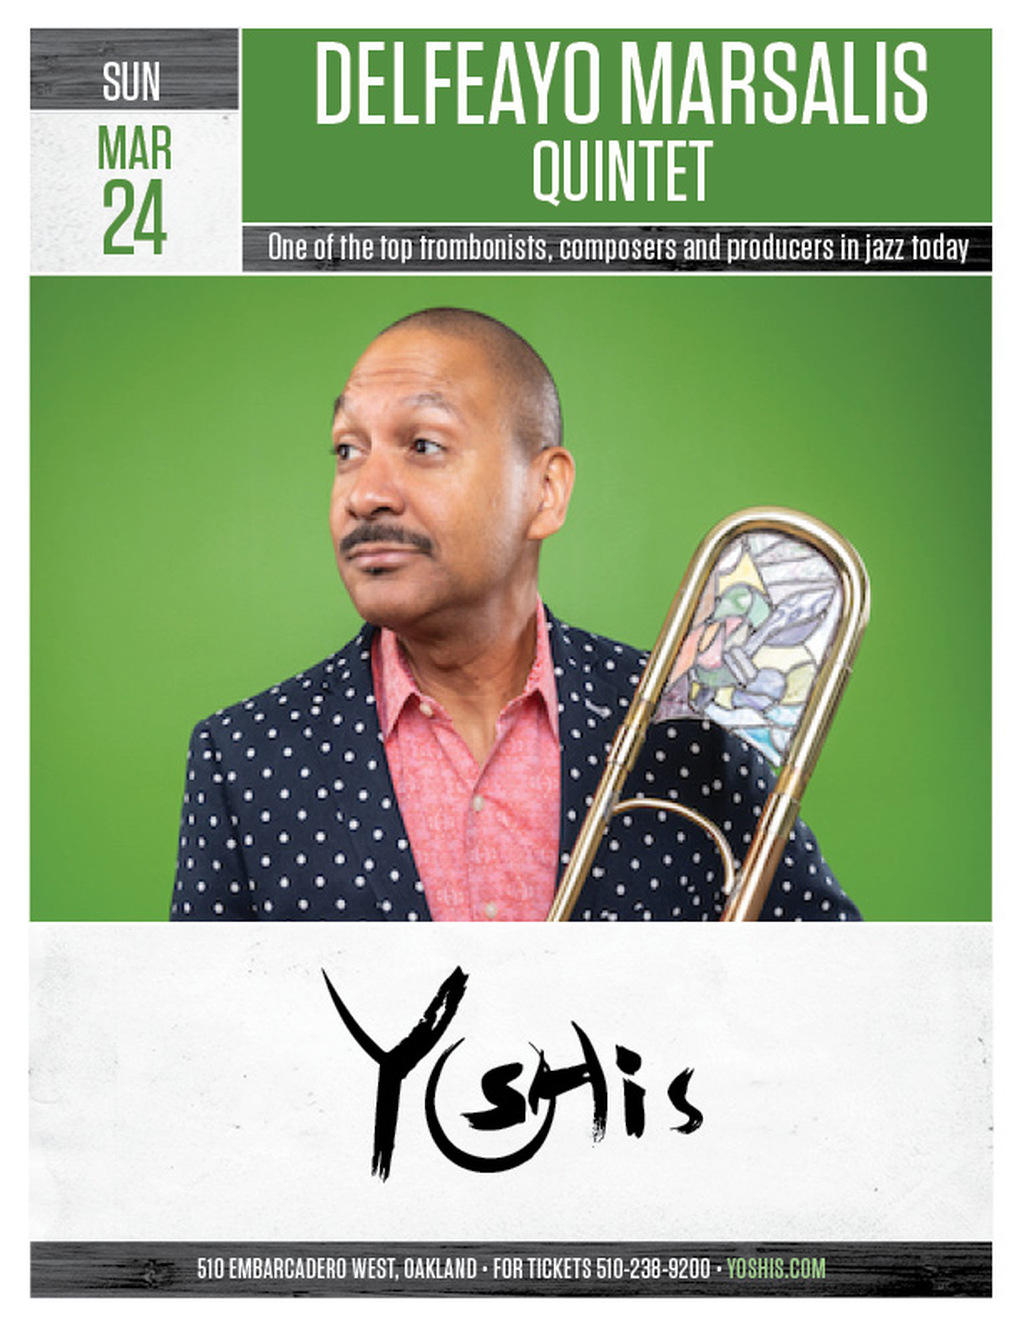 Yoshi s Join Us at Yoshi s for a Night of Incredible Jazz promotion flier on Digifli com